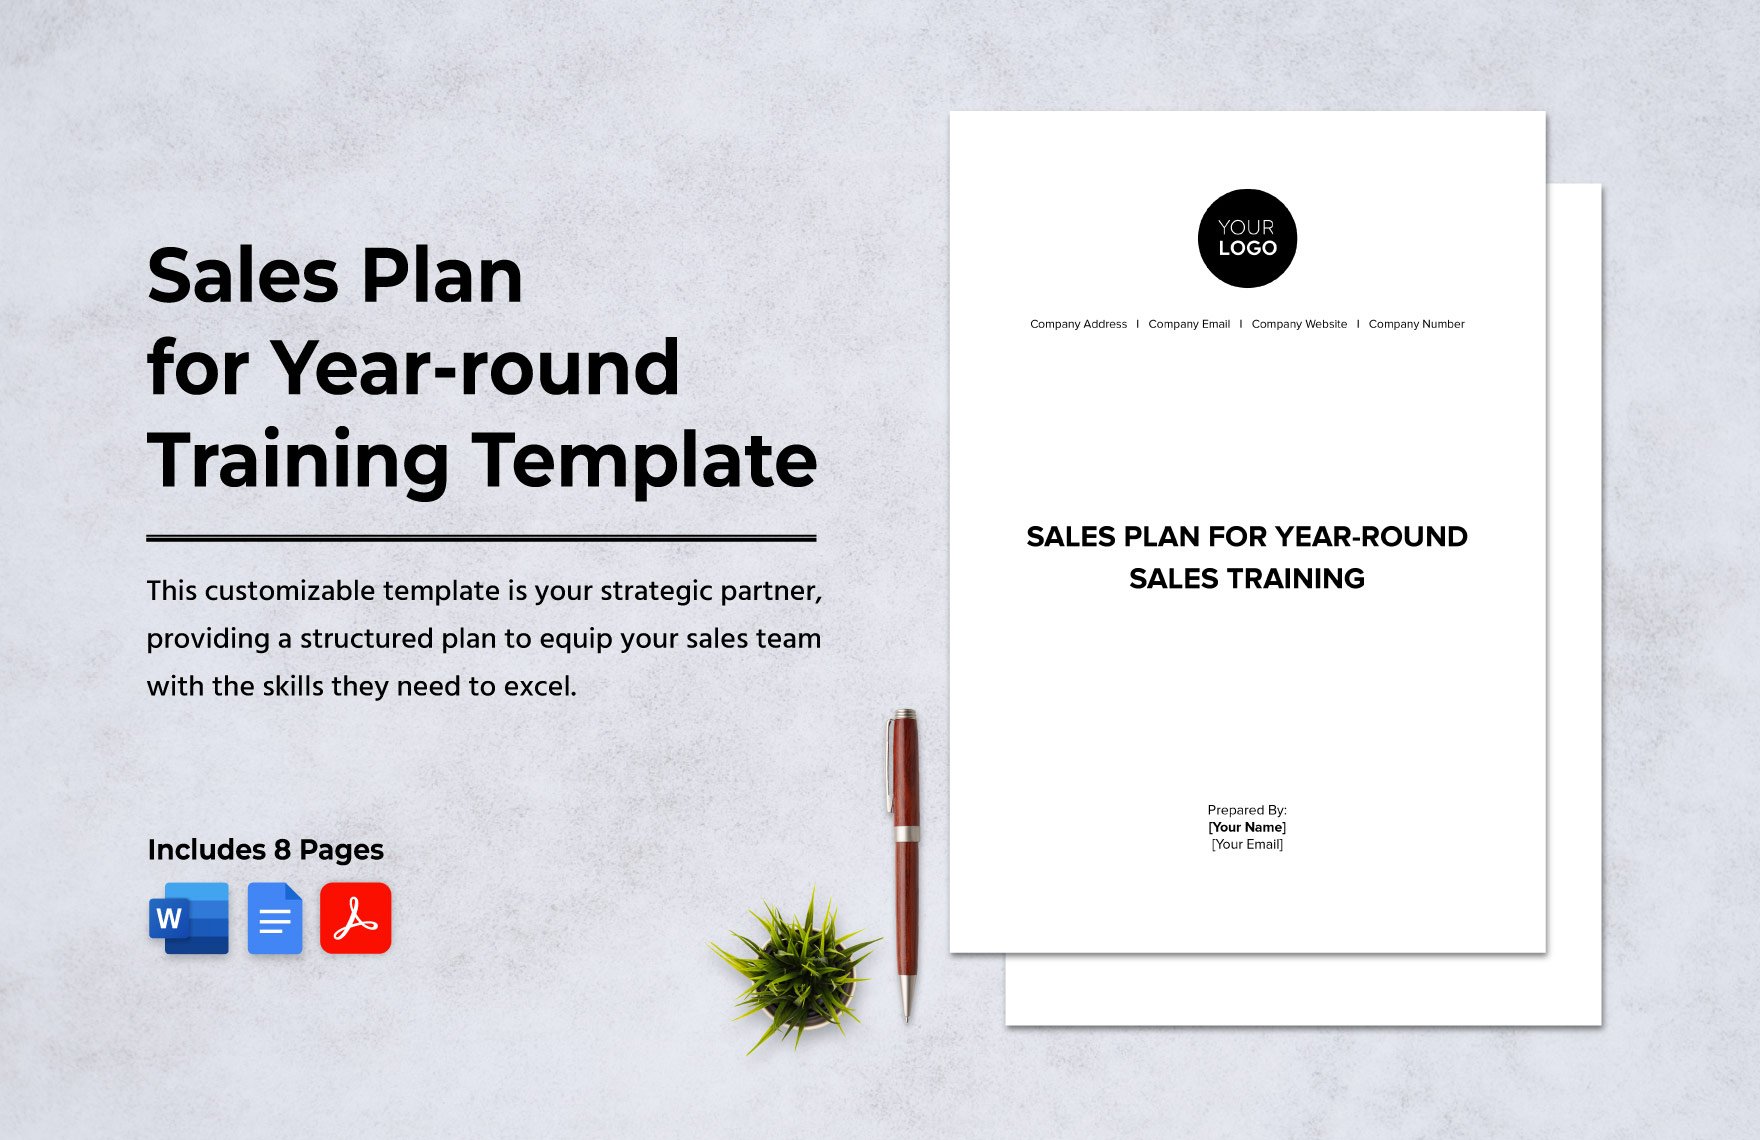 Sales Plan for Year-round Training Template